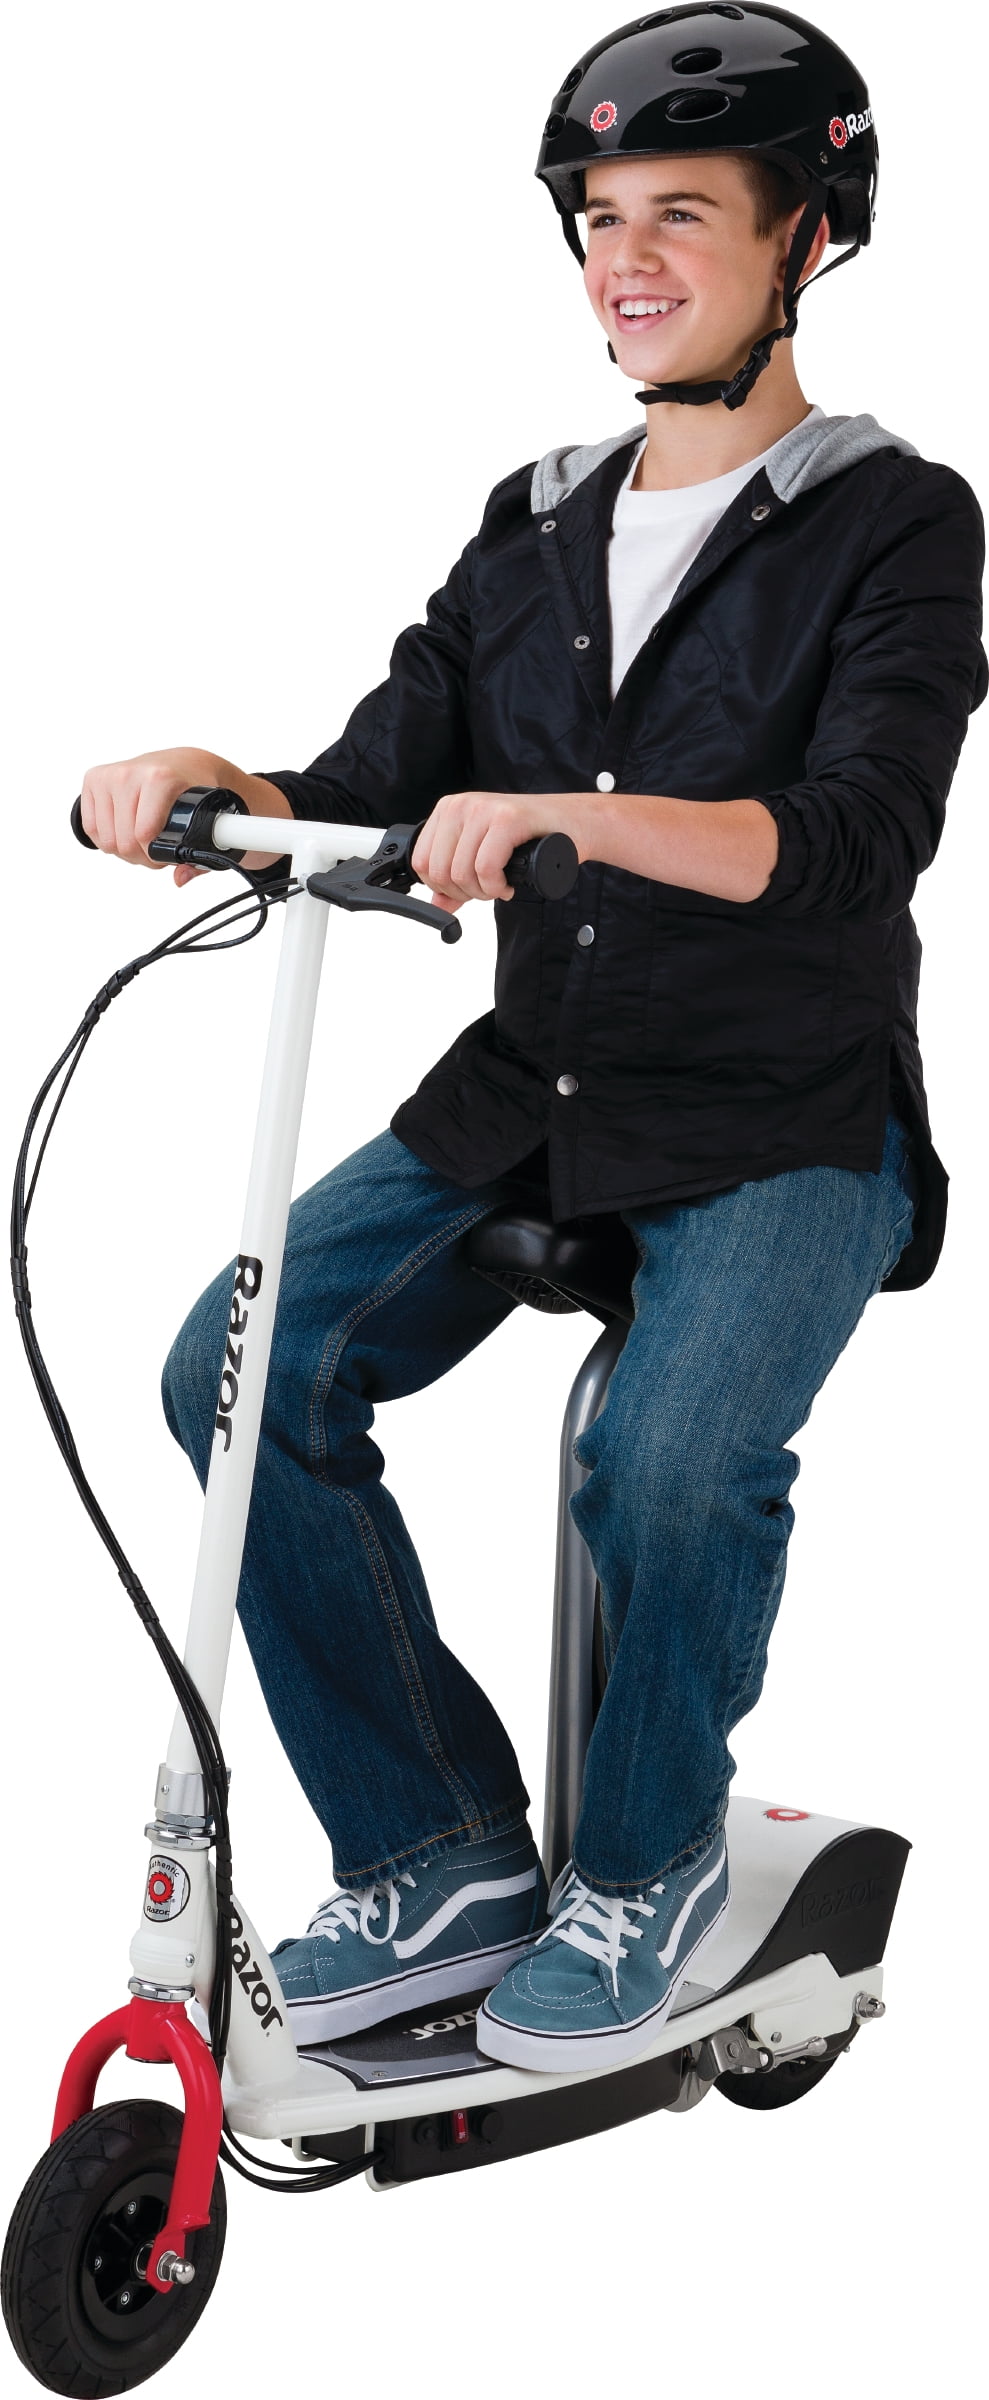 Razor E200S Seated Electric Scooter, for Ages 13+ and up to 154 lbs, 8  Pneumatic Front Tire, 200W Chain Motor, Up to 12 mph & up to 8-mile Range,  24V Sealed Lead-Acid